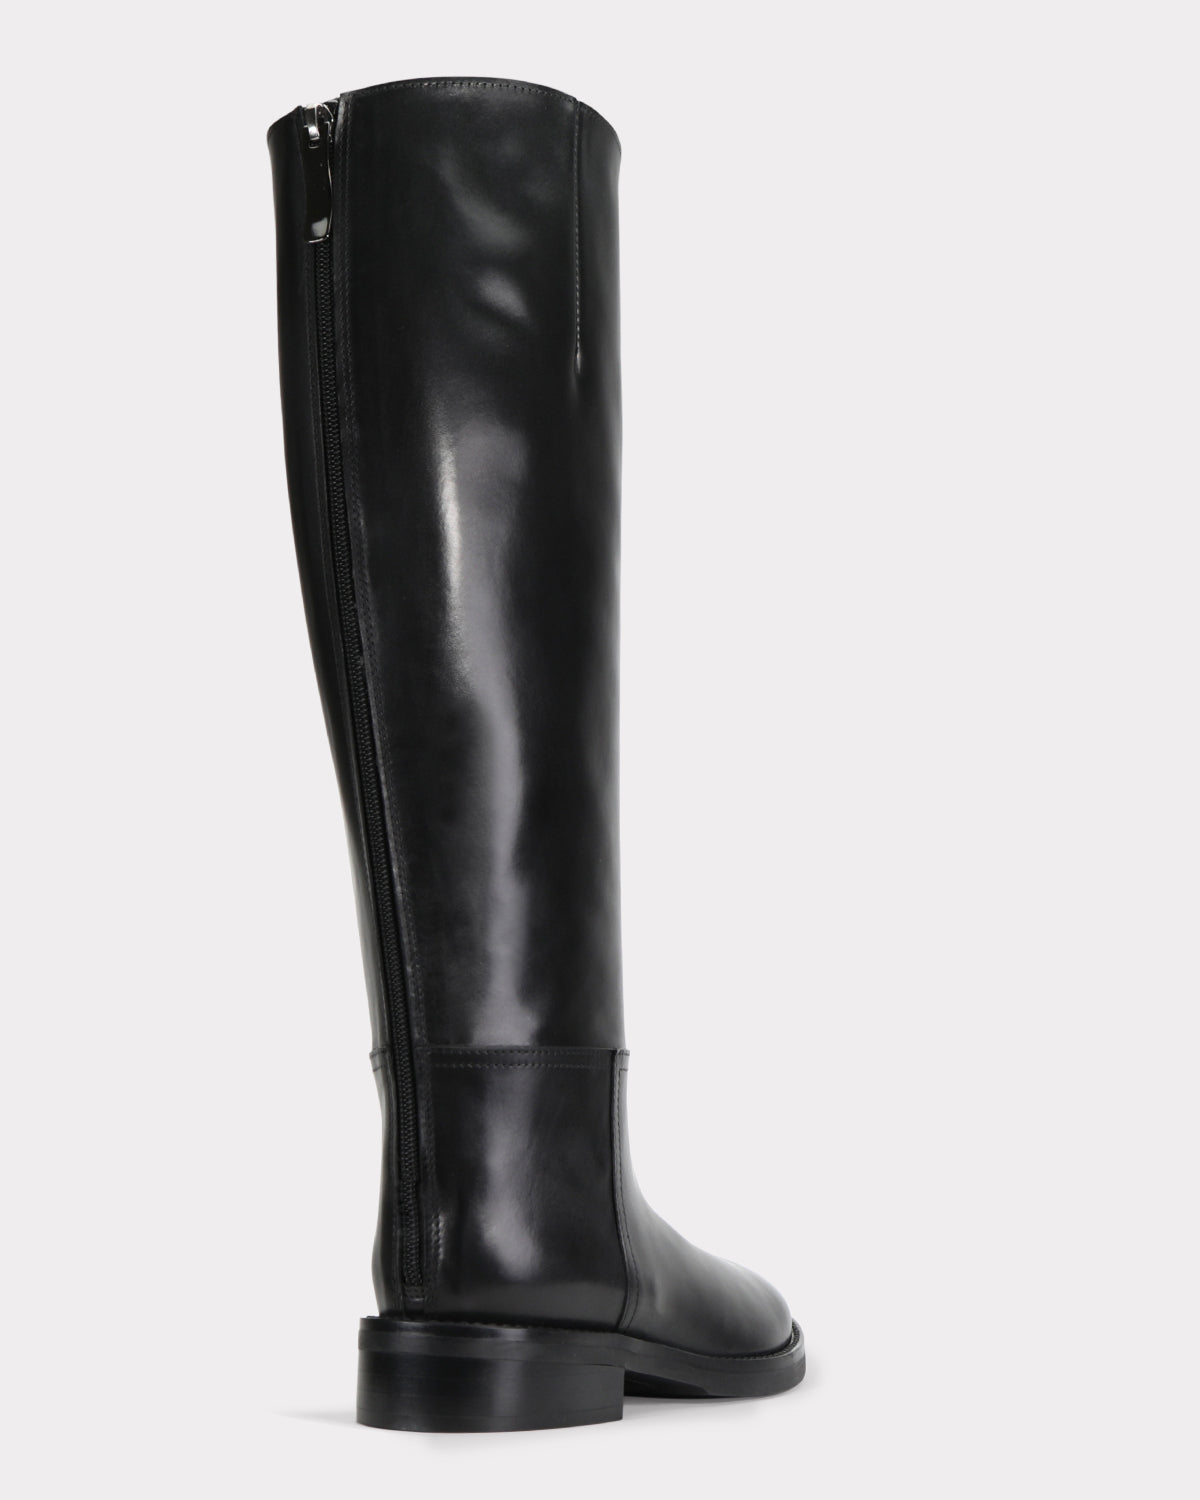 ethically sourced black leather knee high boots